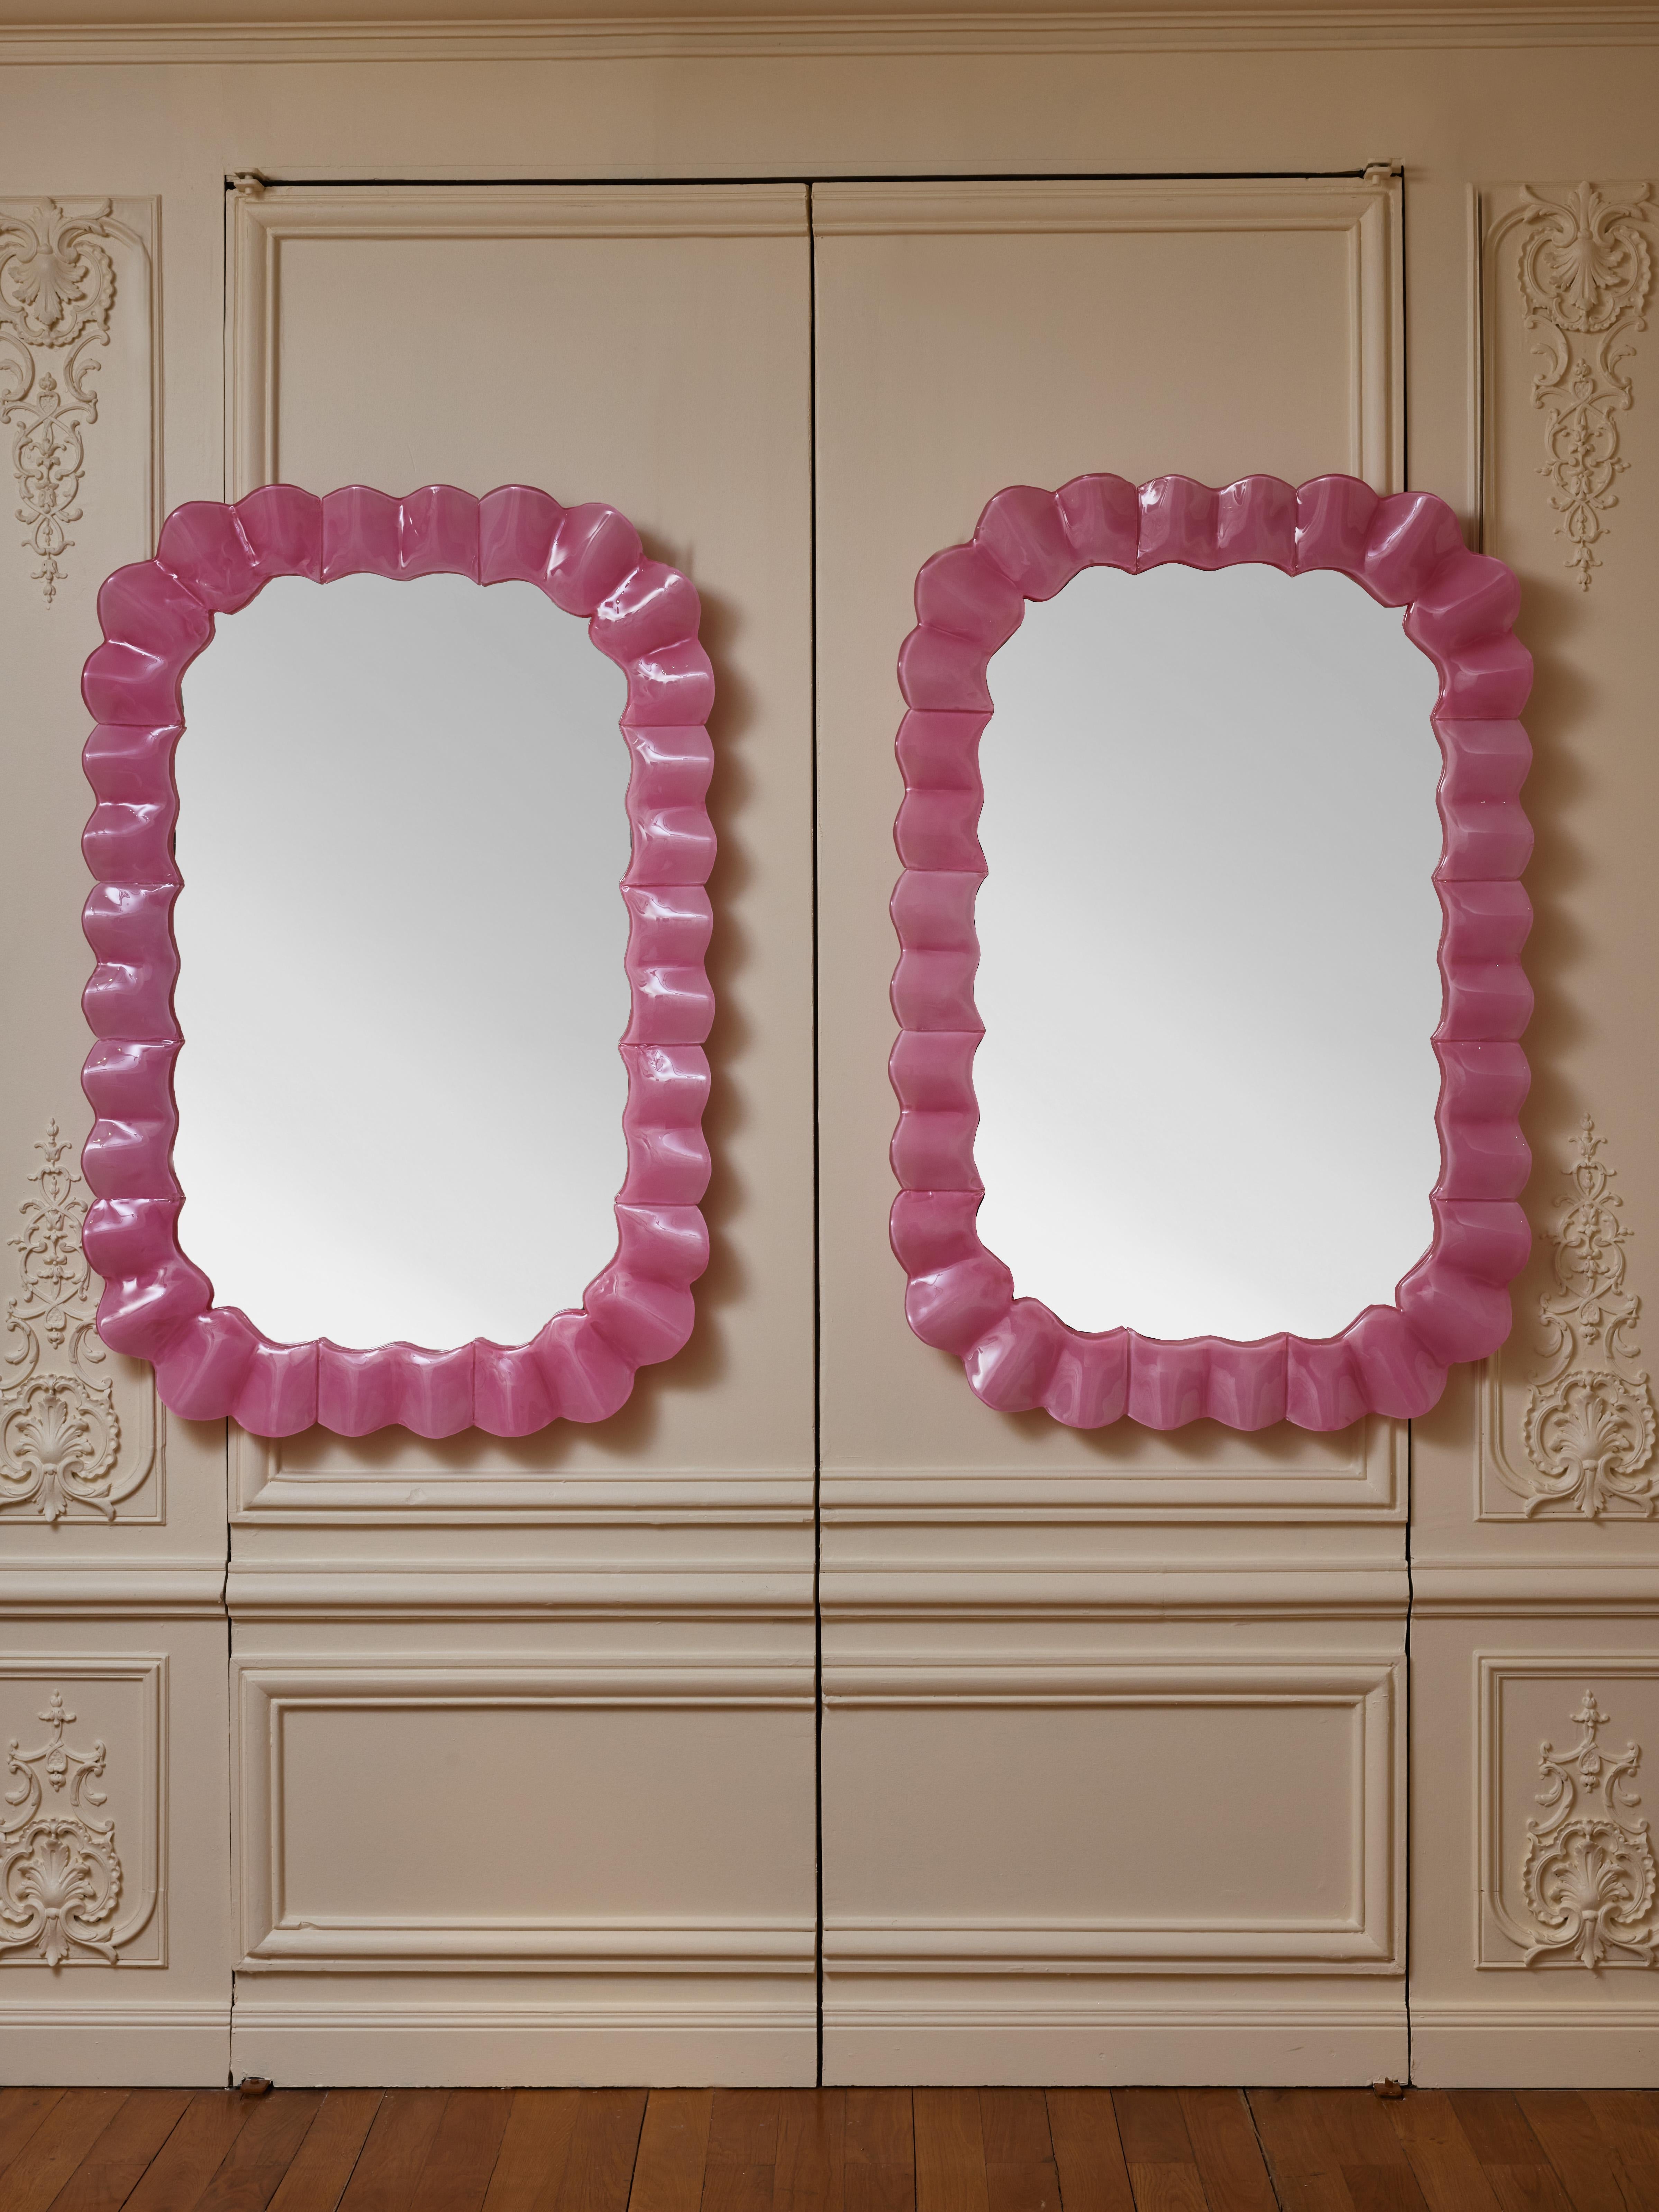 Pair of mirrors with frame in pink Murano glass.
Creation by Studio Glustin.
Italy, 2023.